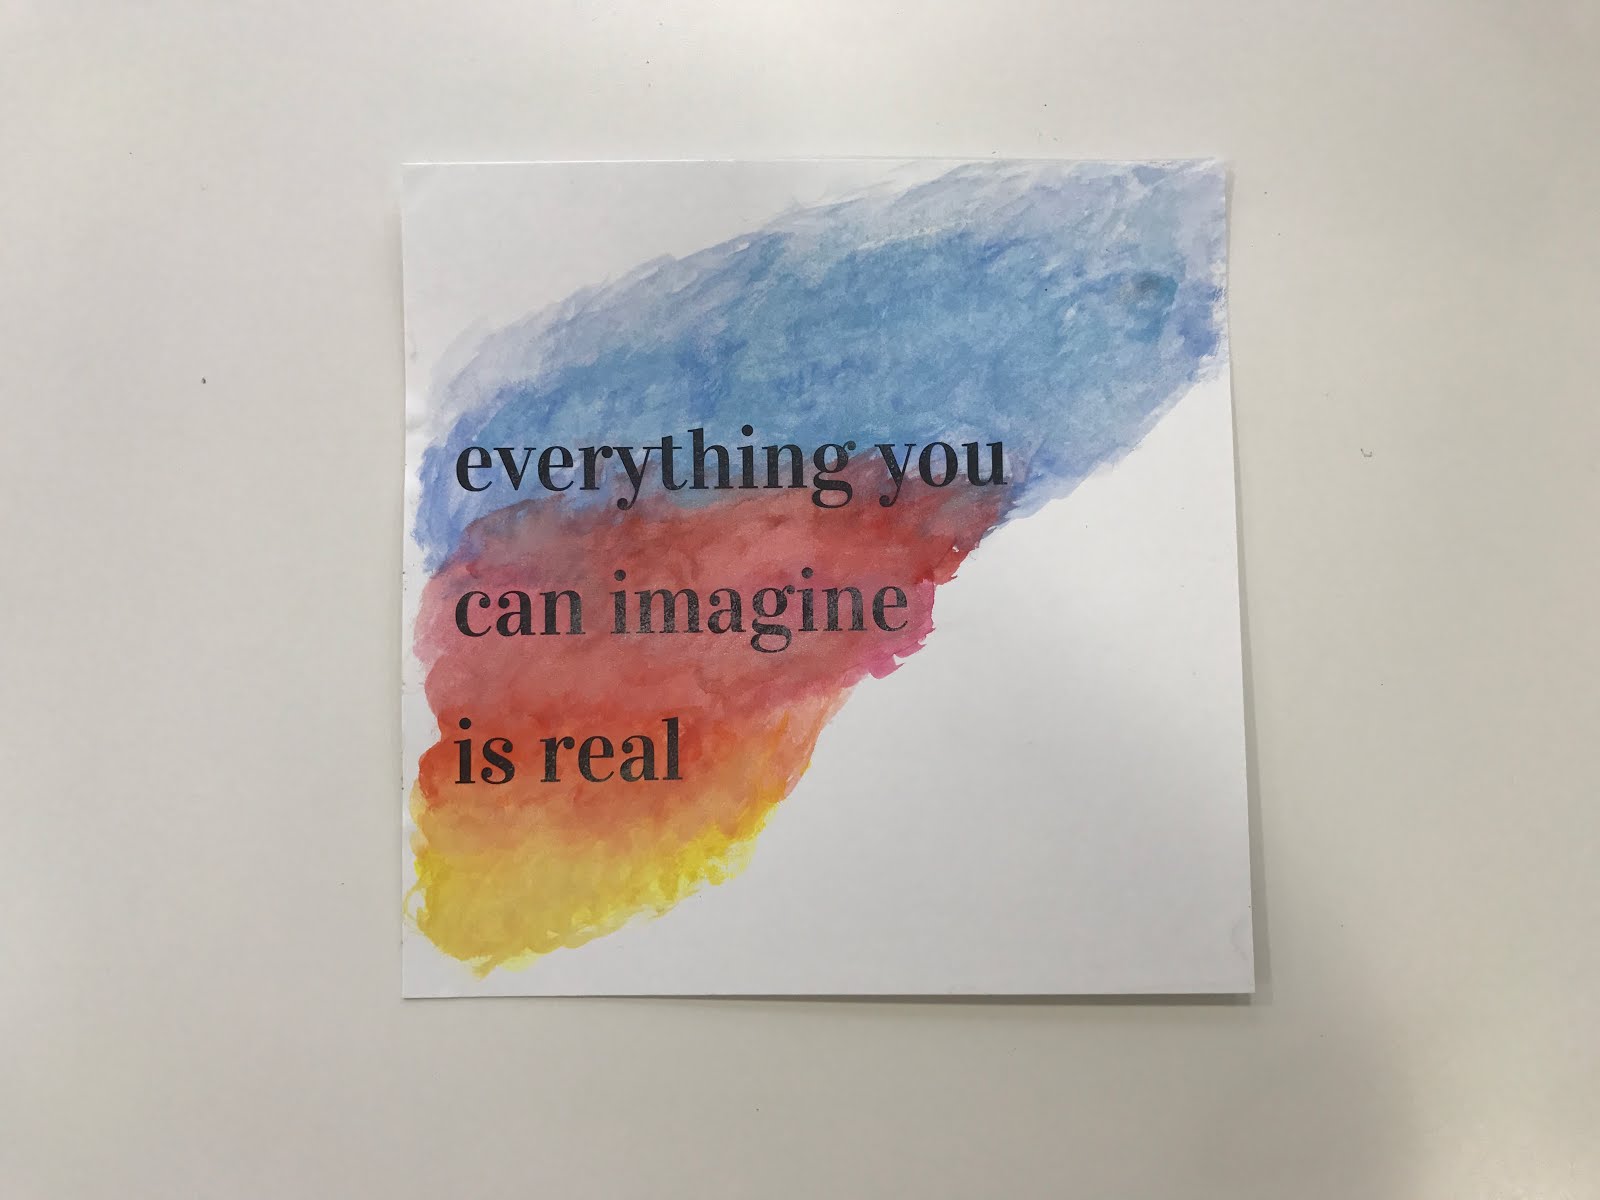 Real everything. Everything you imagine is real. Everything you can imagine. You can imagine is real. Everything you can imagine is real. Рисунок.